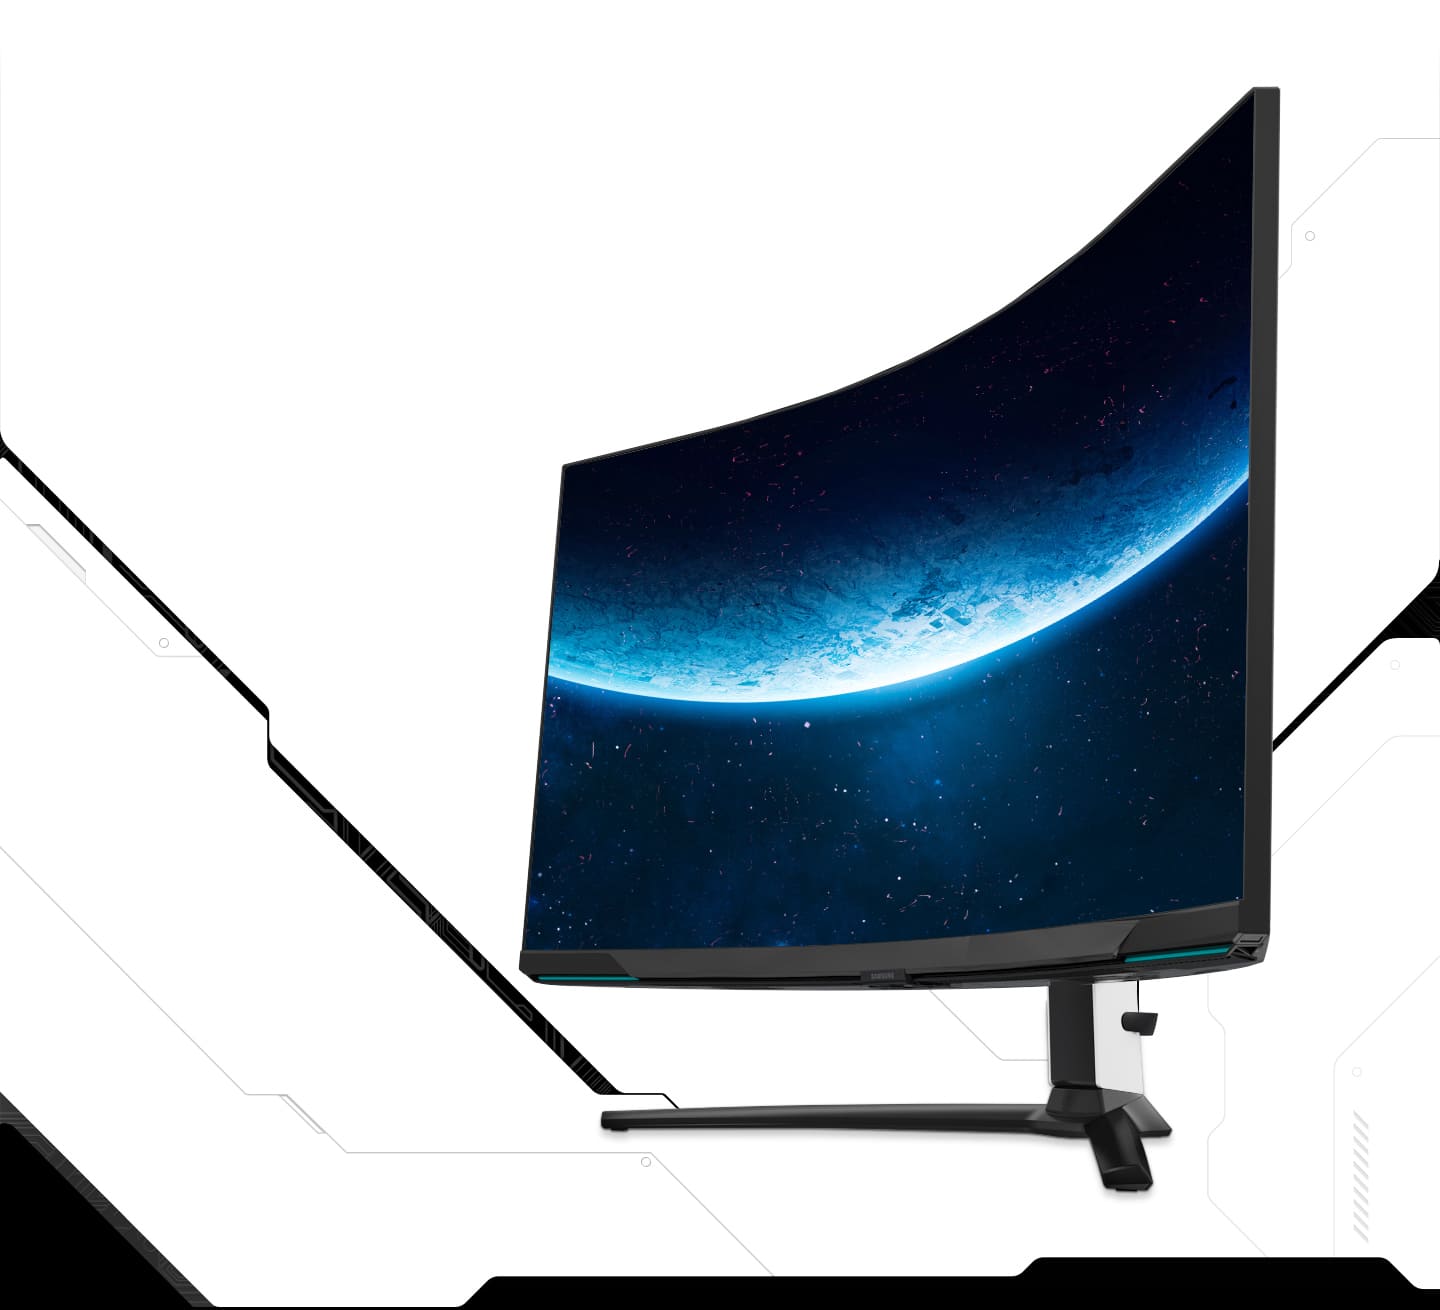 32 Odyssey Neo G8 4K UHD 240Hz 1ms(GtG) Quantum HDR2000 Curved Gaming  Monitor with Matte Display Monitor